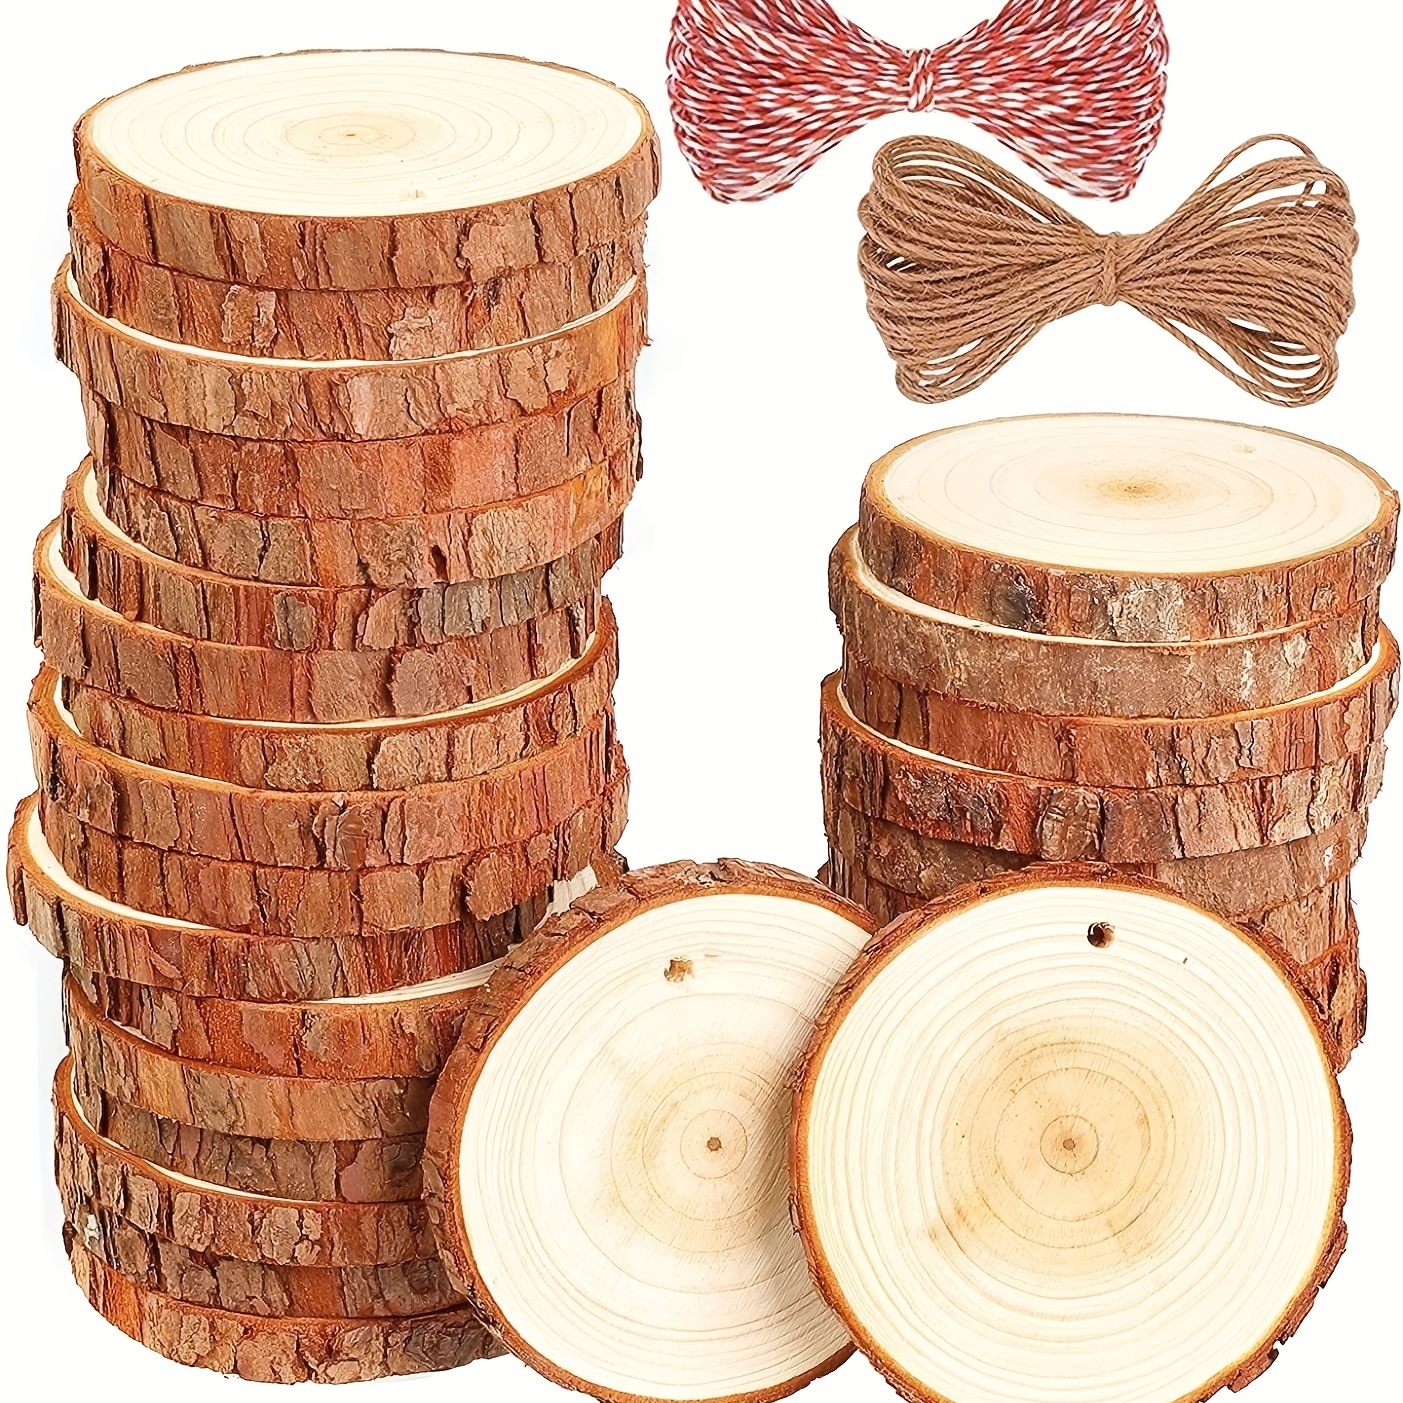 

Wood Slices, 30pcs 2.8"-3.1" Wood Kit Predrilled With Hole Wooden Circles For Arts Wood Slices Christmas Ornaments Diy Crafts